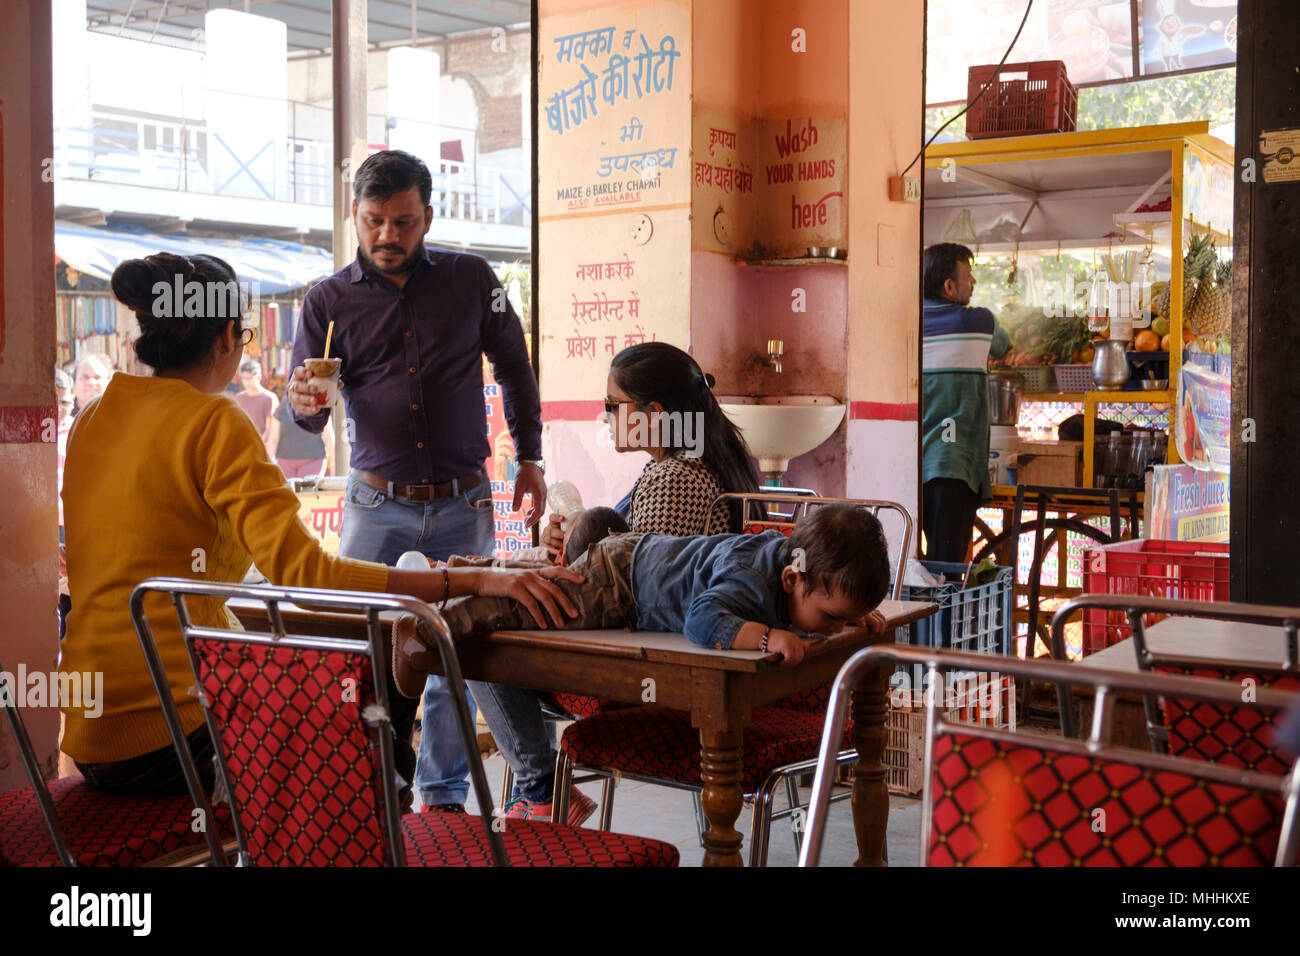 India - Pushkar - Child lies on a table in cafe as man brings a drink to the table. Stock Photo